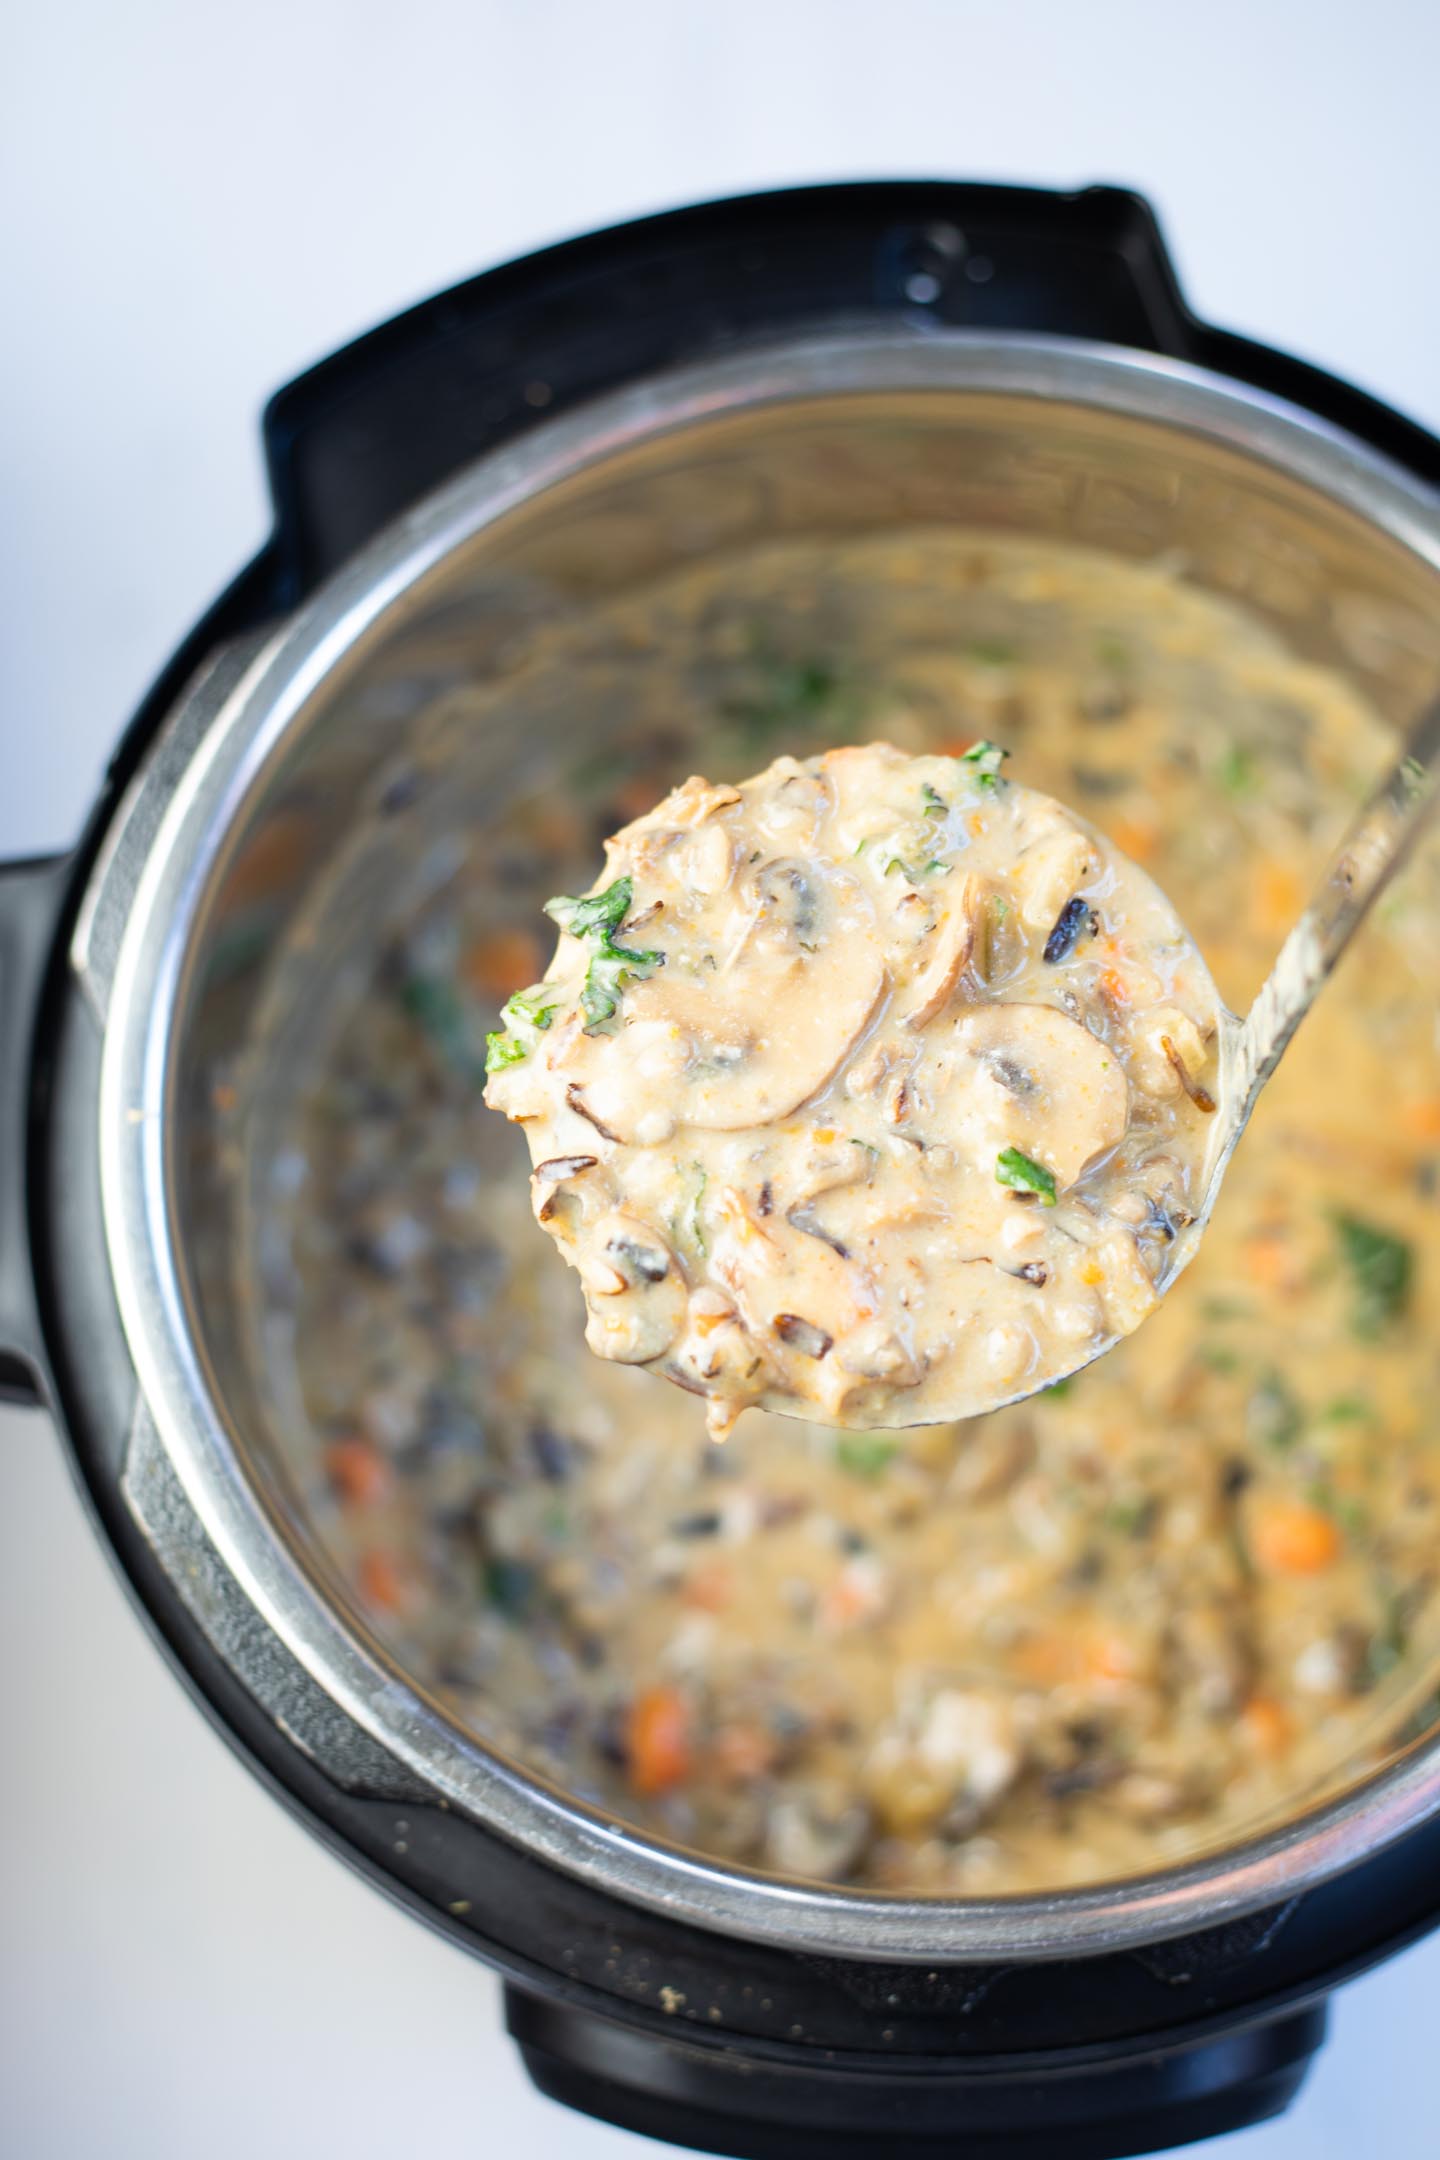 Creamy soup with mushrooms and kale in the instant pot